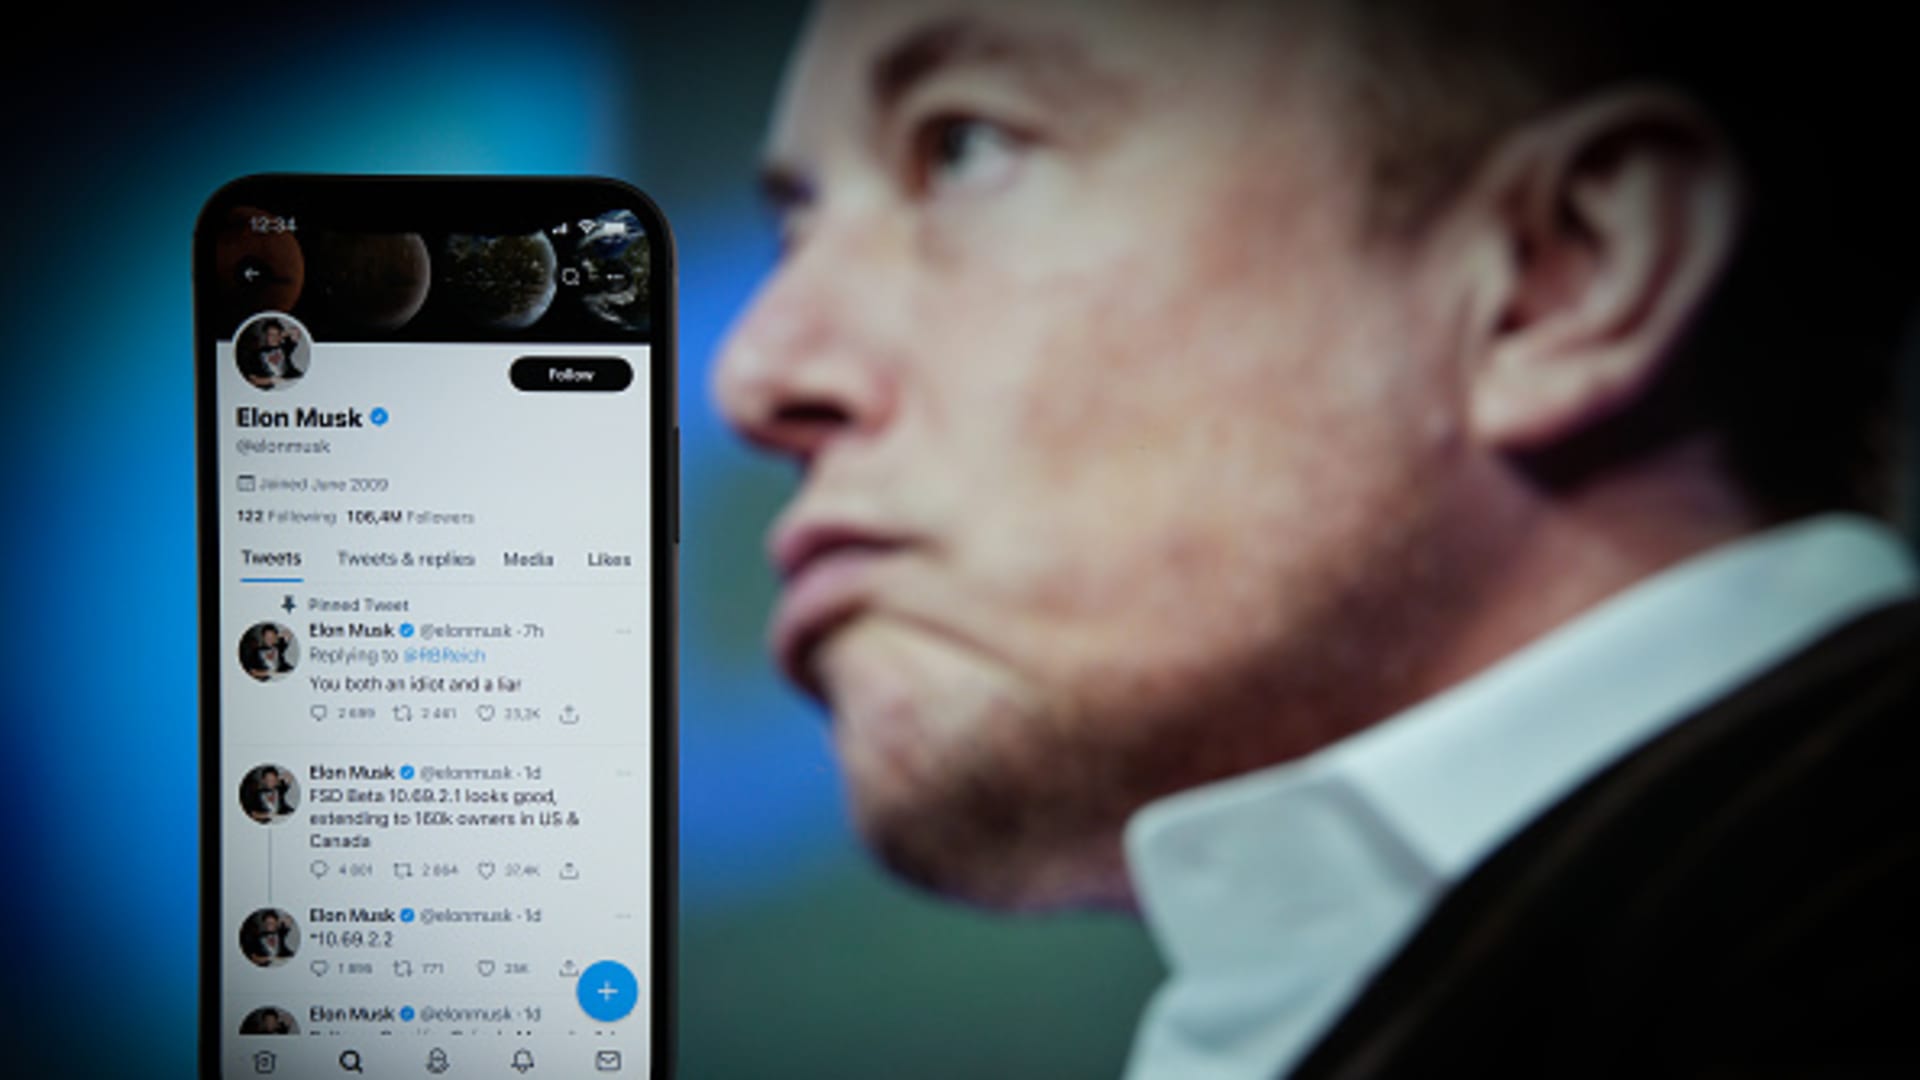 Elon Musk took over a struggling business with Twitter and has quickly made it worse